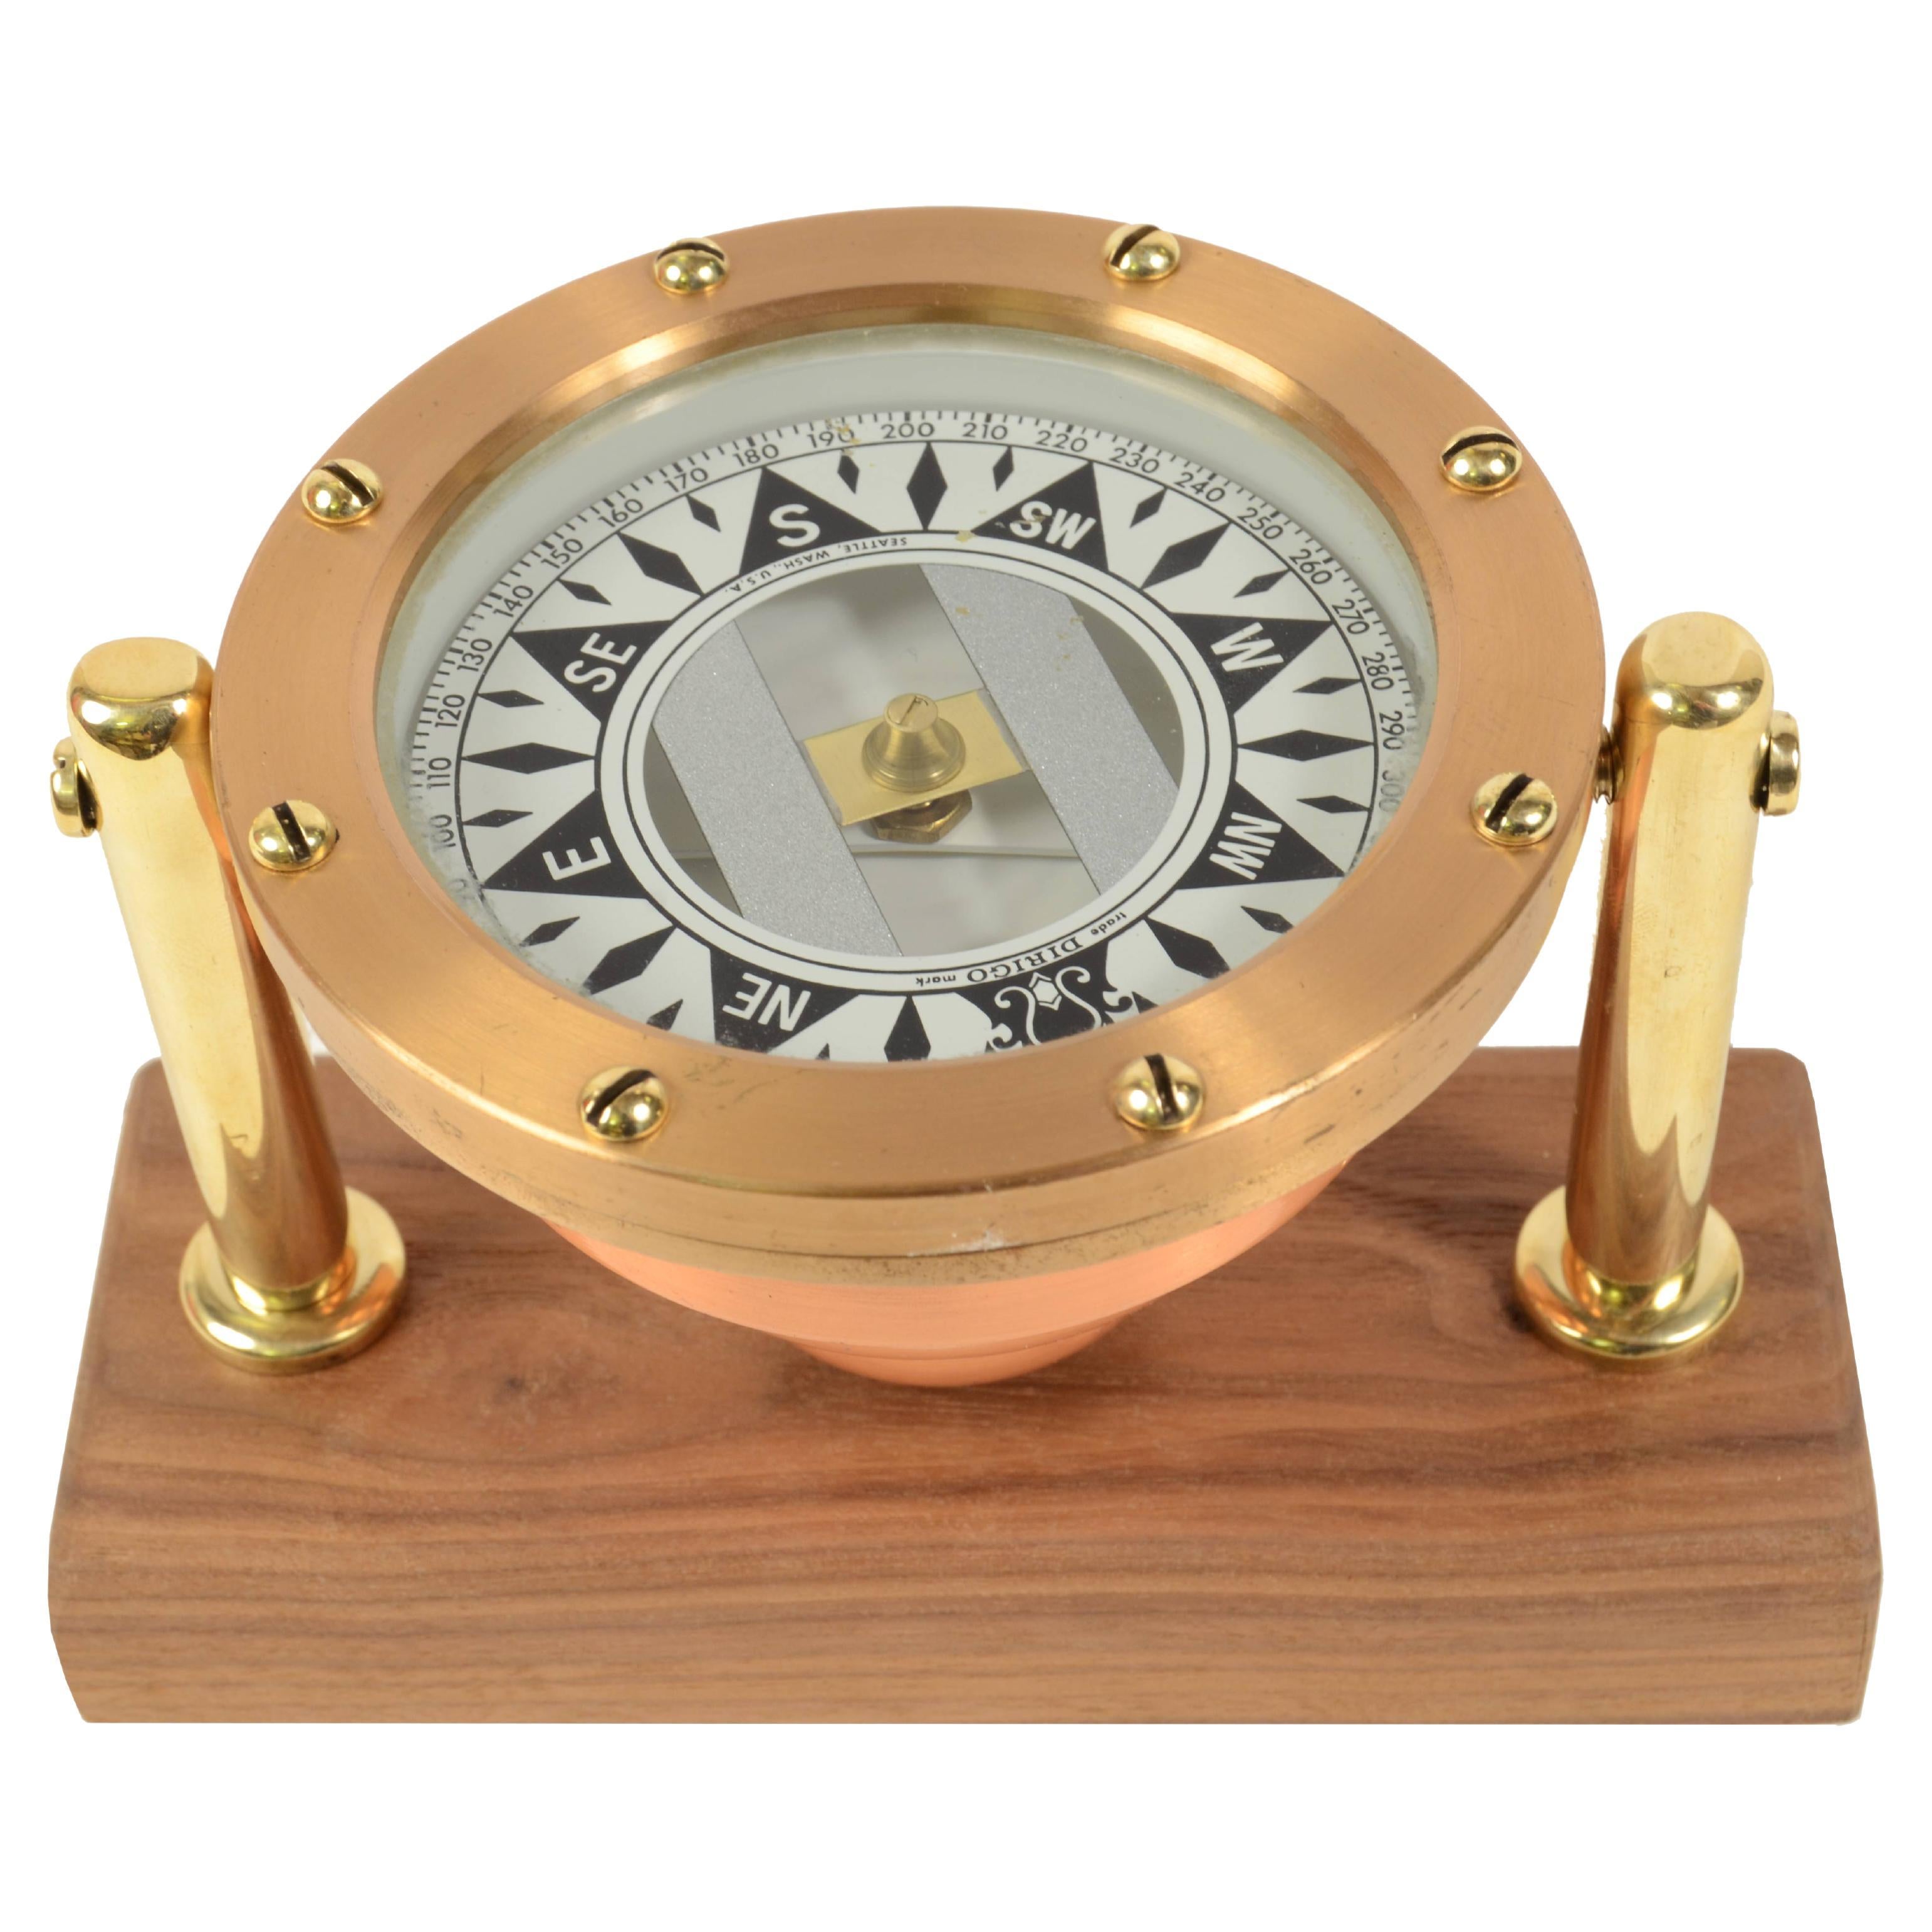 Details about   Rare Vintage Marine Antique Brass Compass Old Style Directional Nautical Compass 